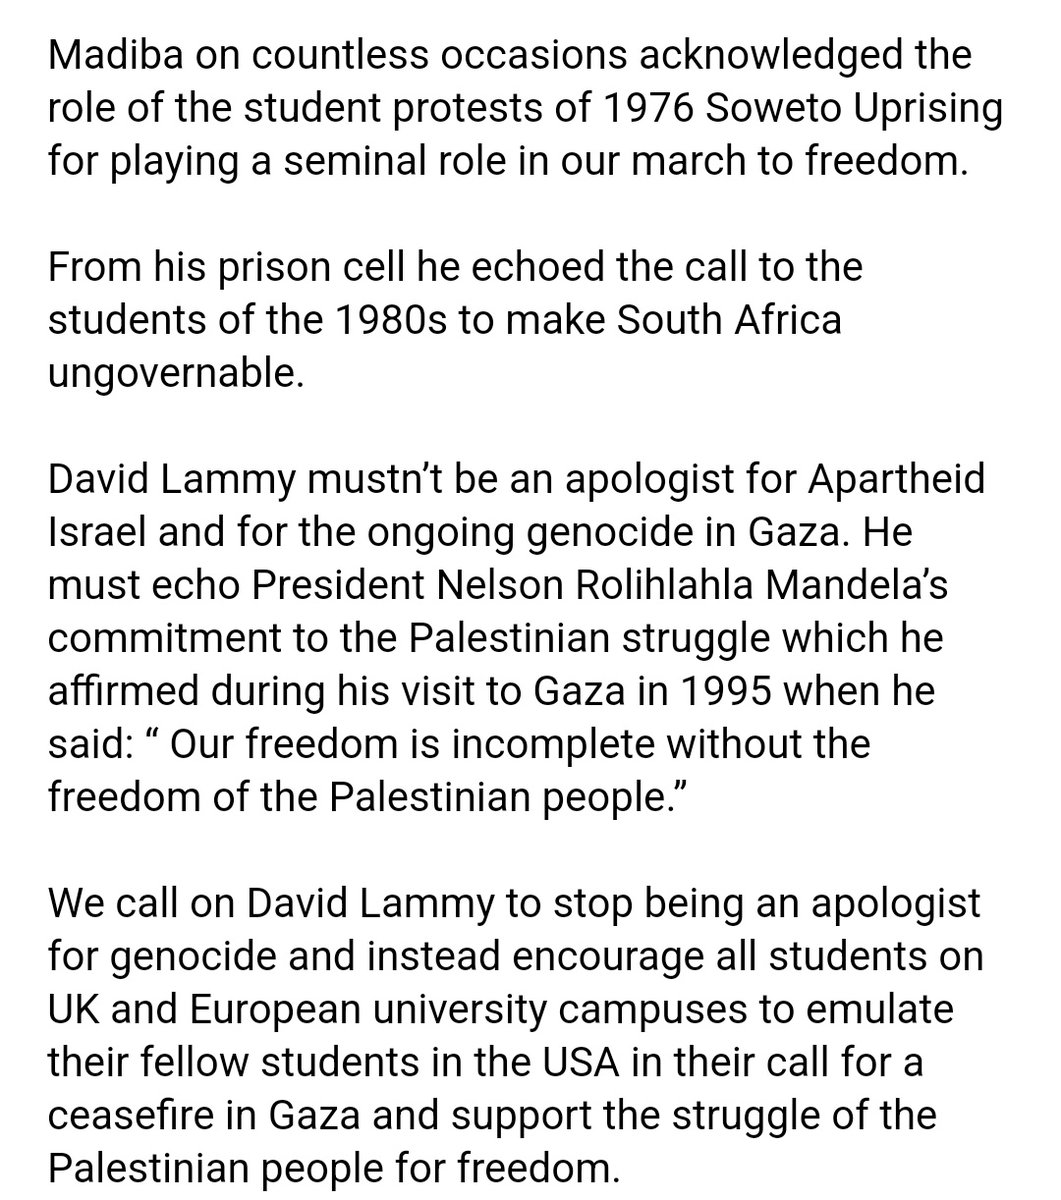 🚨🚨🚨🚨🚨🚨🚨🚨🚨🚨🚨🚨🚨

BREAKING - Media Statement by Nelson Mandela's grandson, Zwelivelile 'Mandla' Mandela, in direct response to comments made by Labour Shadow Foreign Secretary @DavidLammy.

He calls Lammy an 'apologist for genocide'.

FULL STATEMENT:

'We call on…